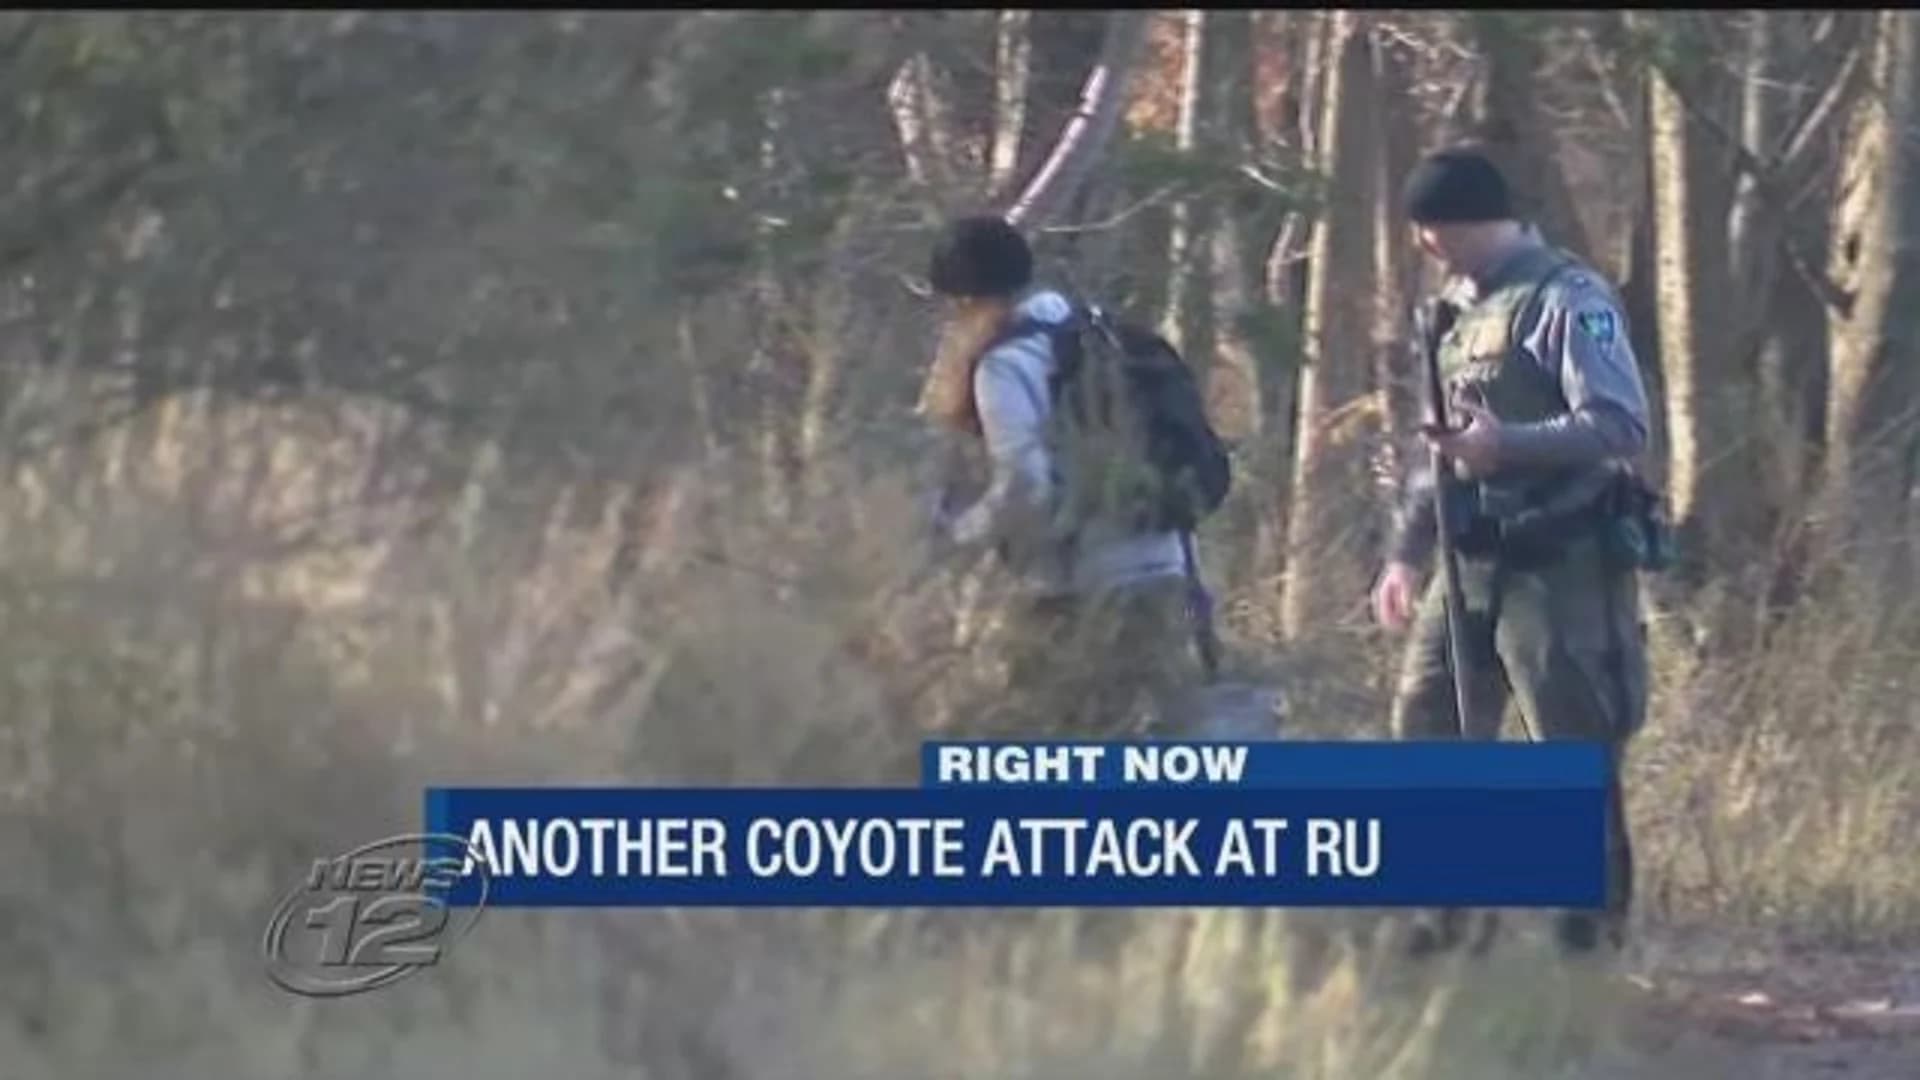 Rutgers students on edge after 2 coyote attacks on campus